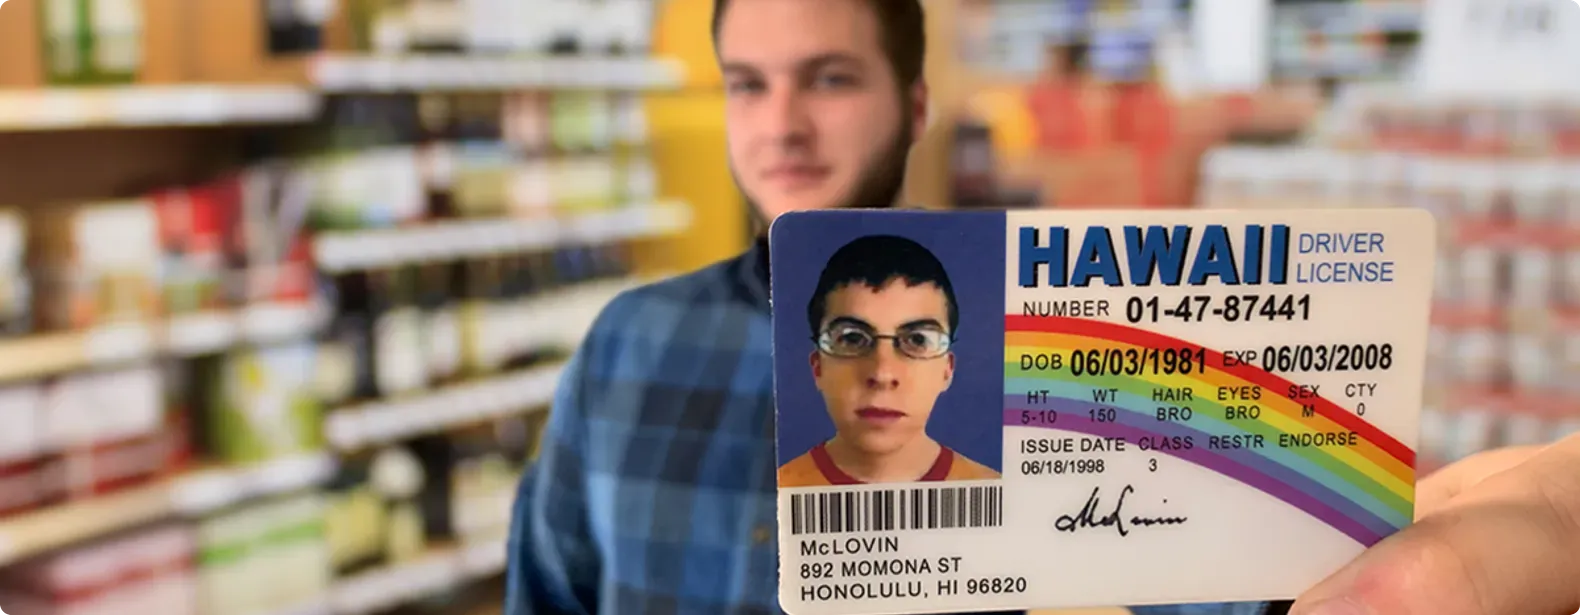 fake id scans